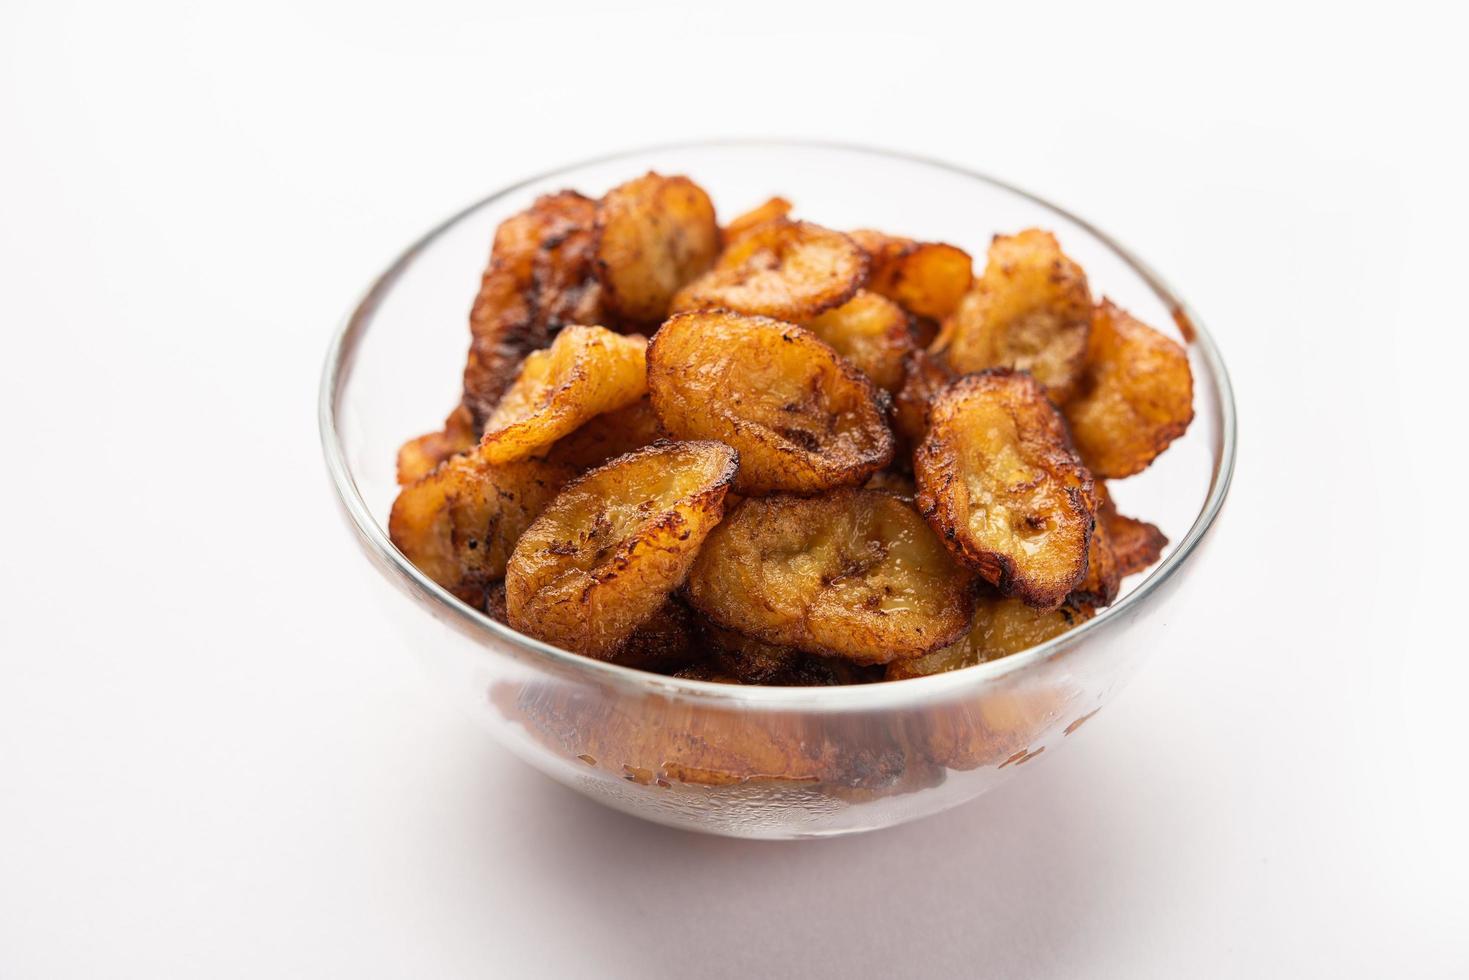 Deep fried ripe plantain slices or pake kele fried chips in a bowl photo